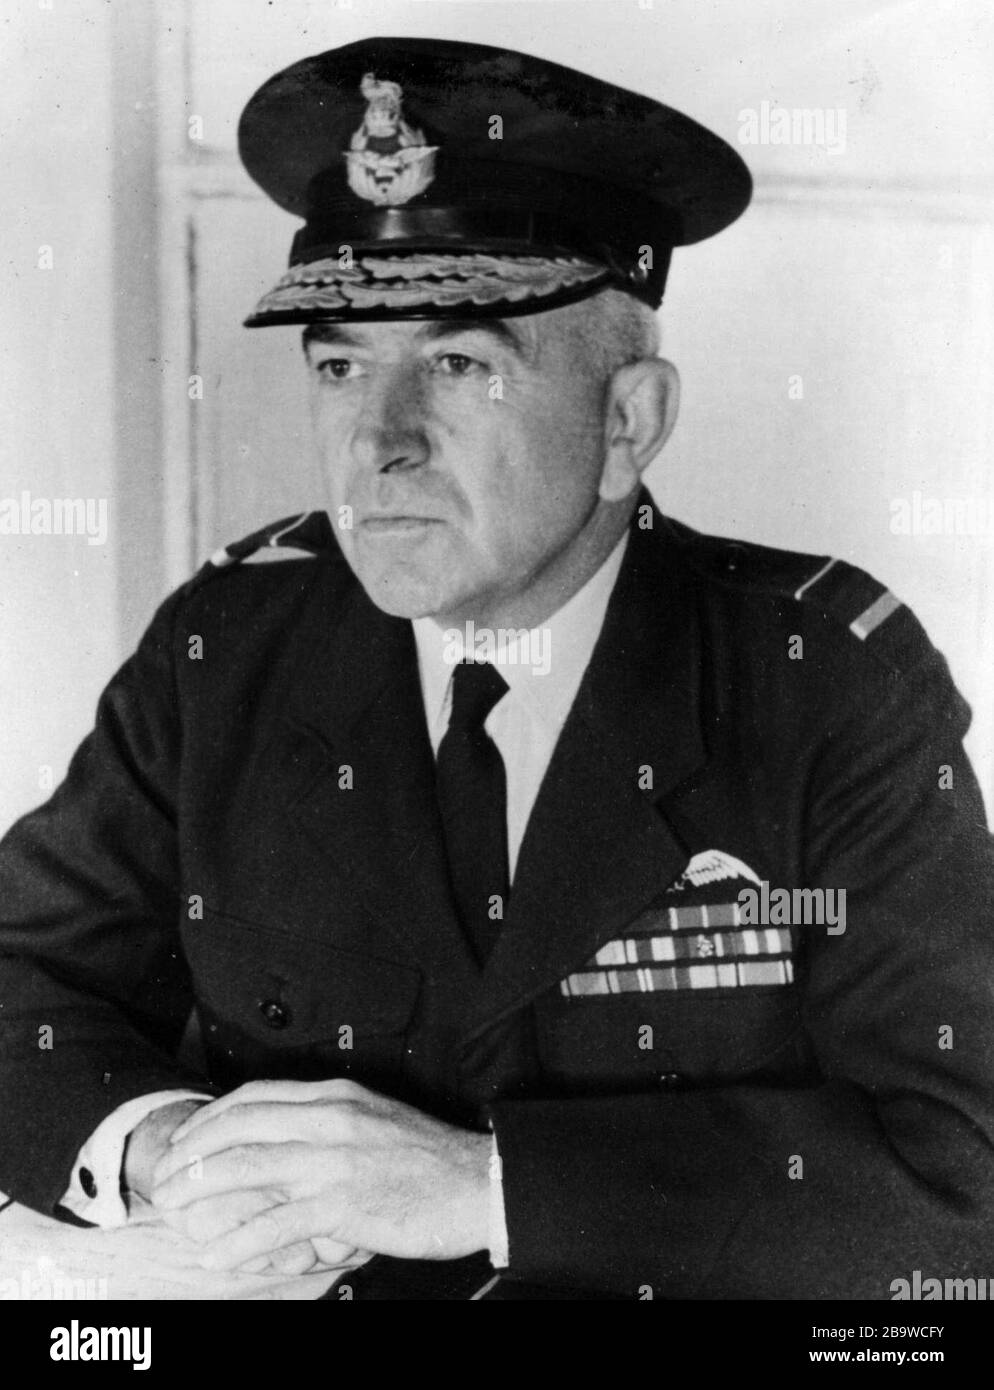 Air Vice Marshal High Resolution Stock Photography and Images - Alamy